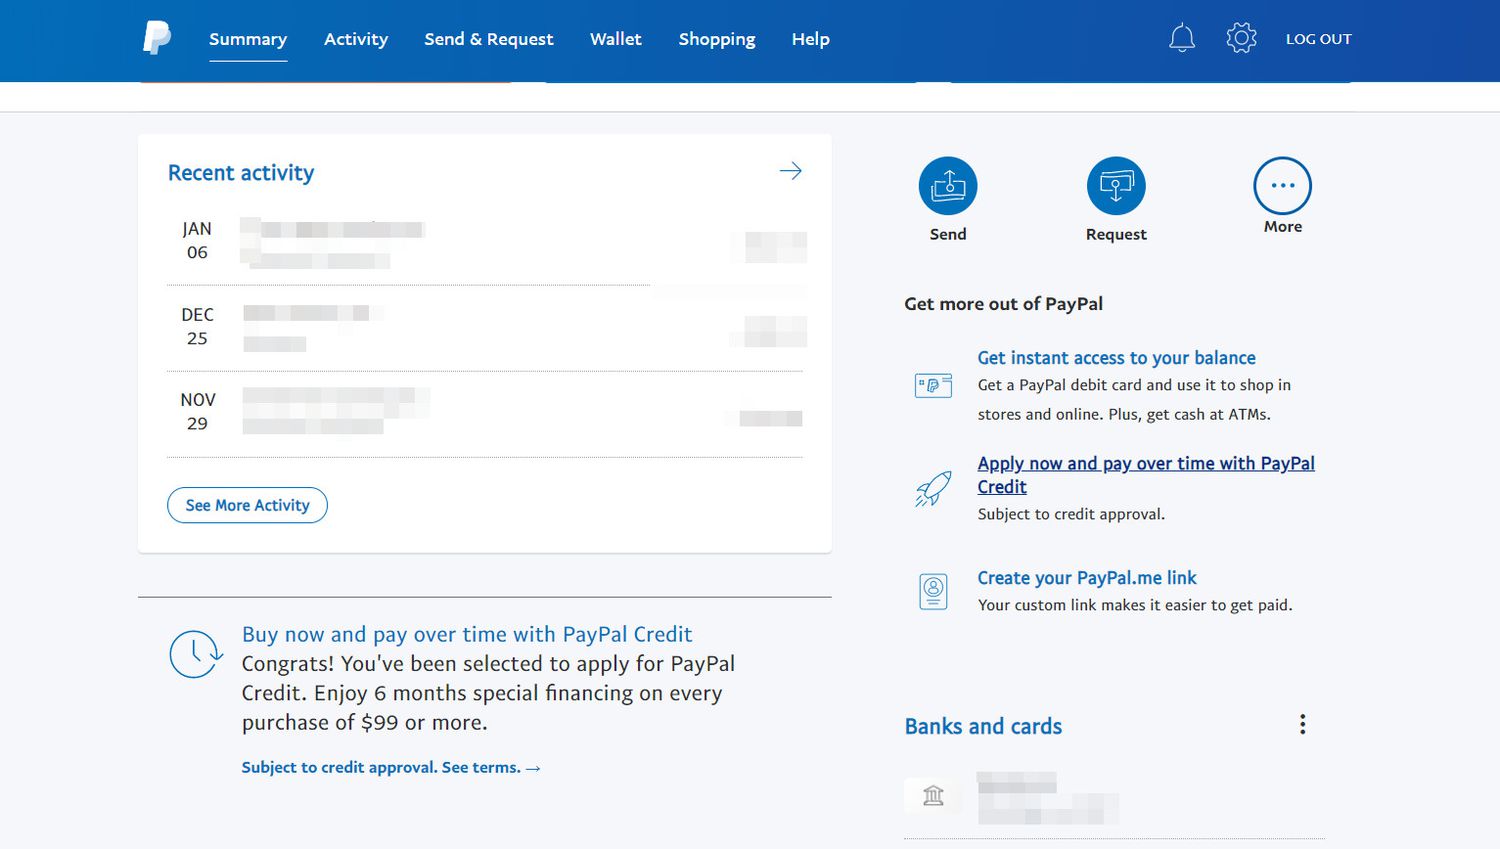 What payment methods can I use with PayPal? | PayPal SG